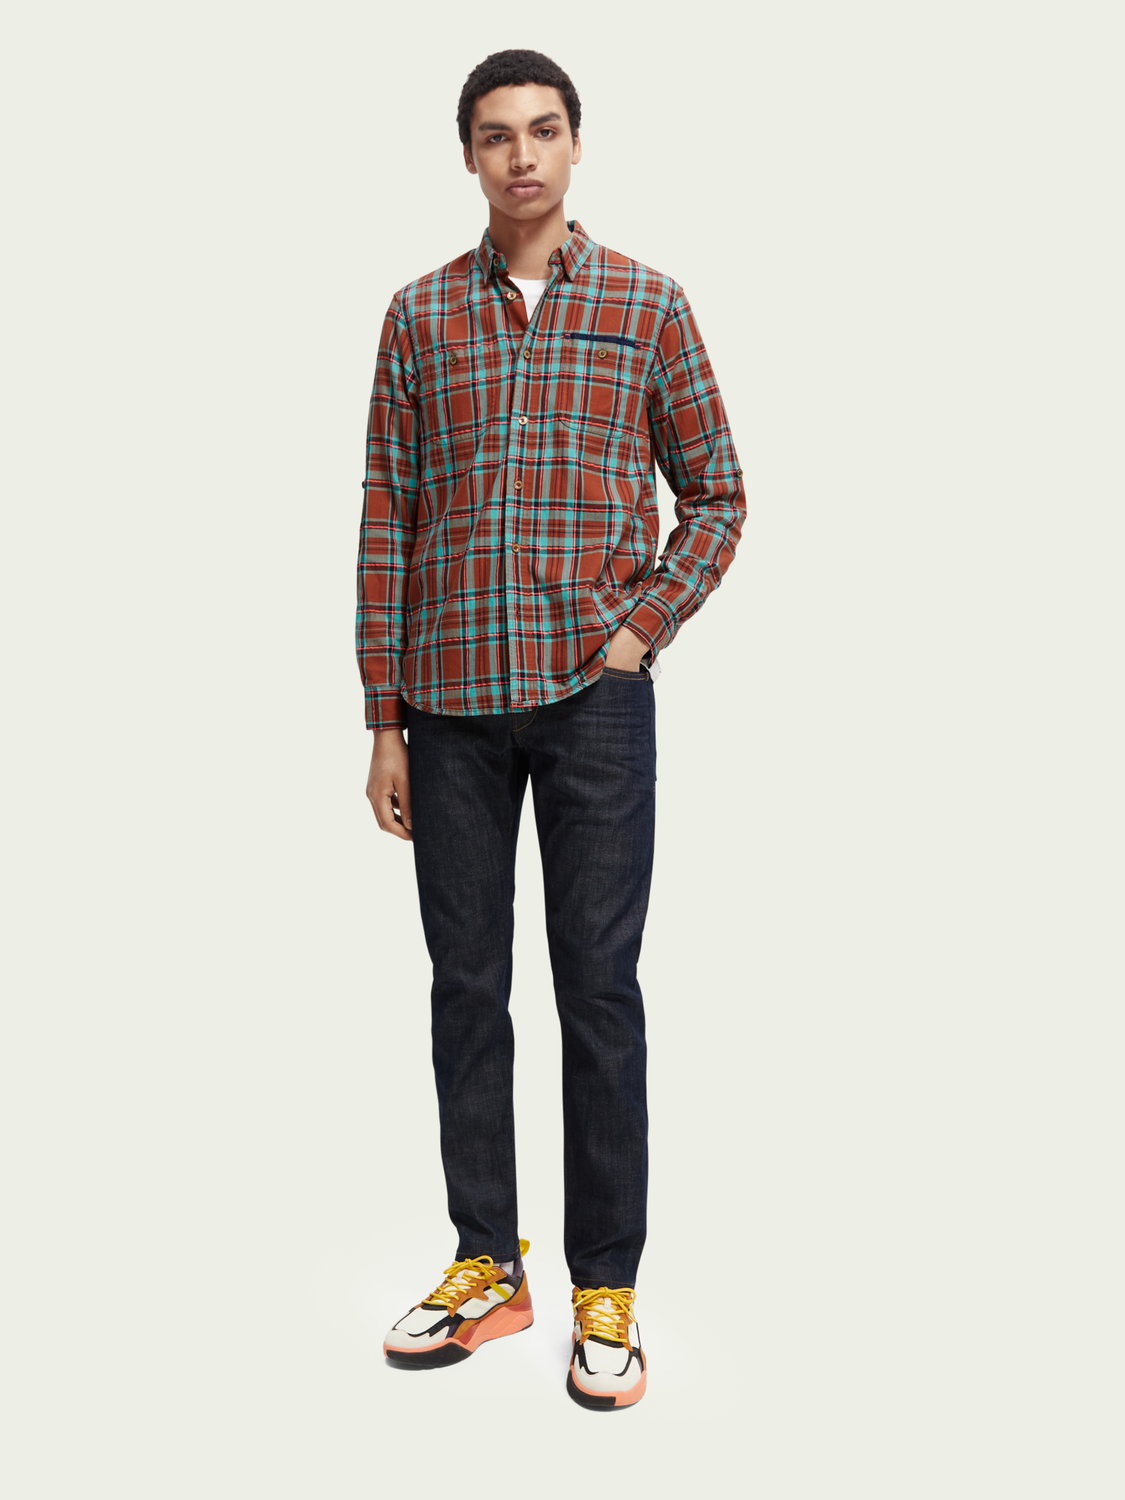 Scotch & Soda - Regular Fit Check Flannel Shirt - Red/Teal